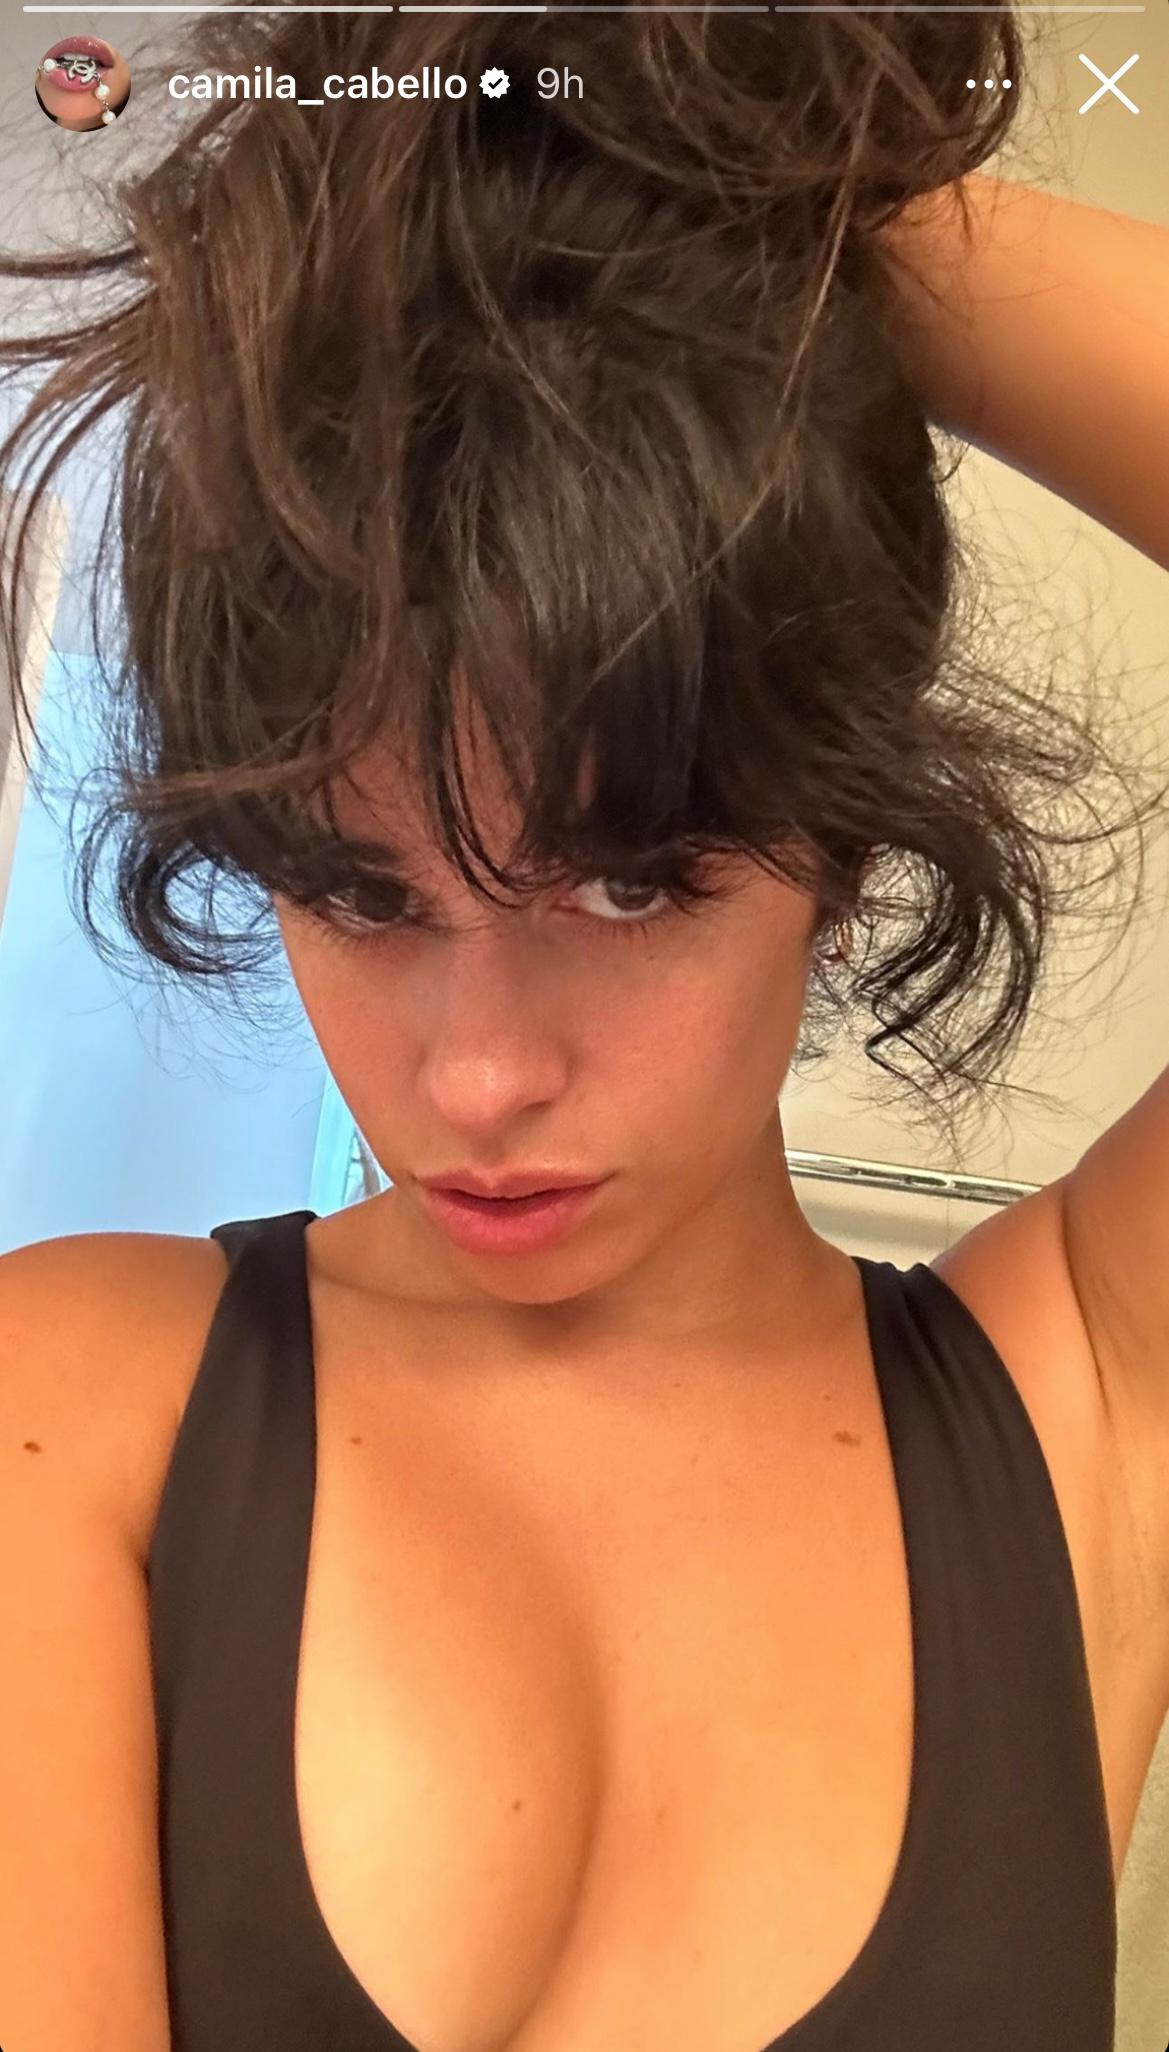 Camila Cabello shares selfie of messy hair and cleavage